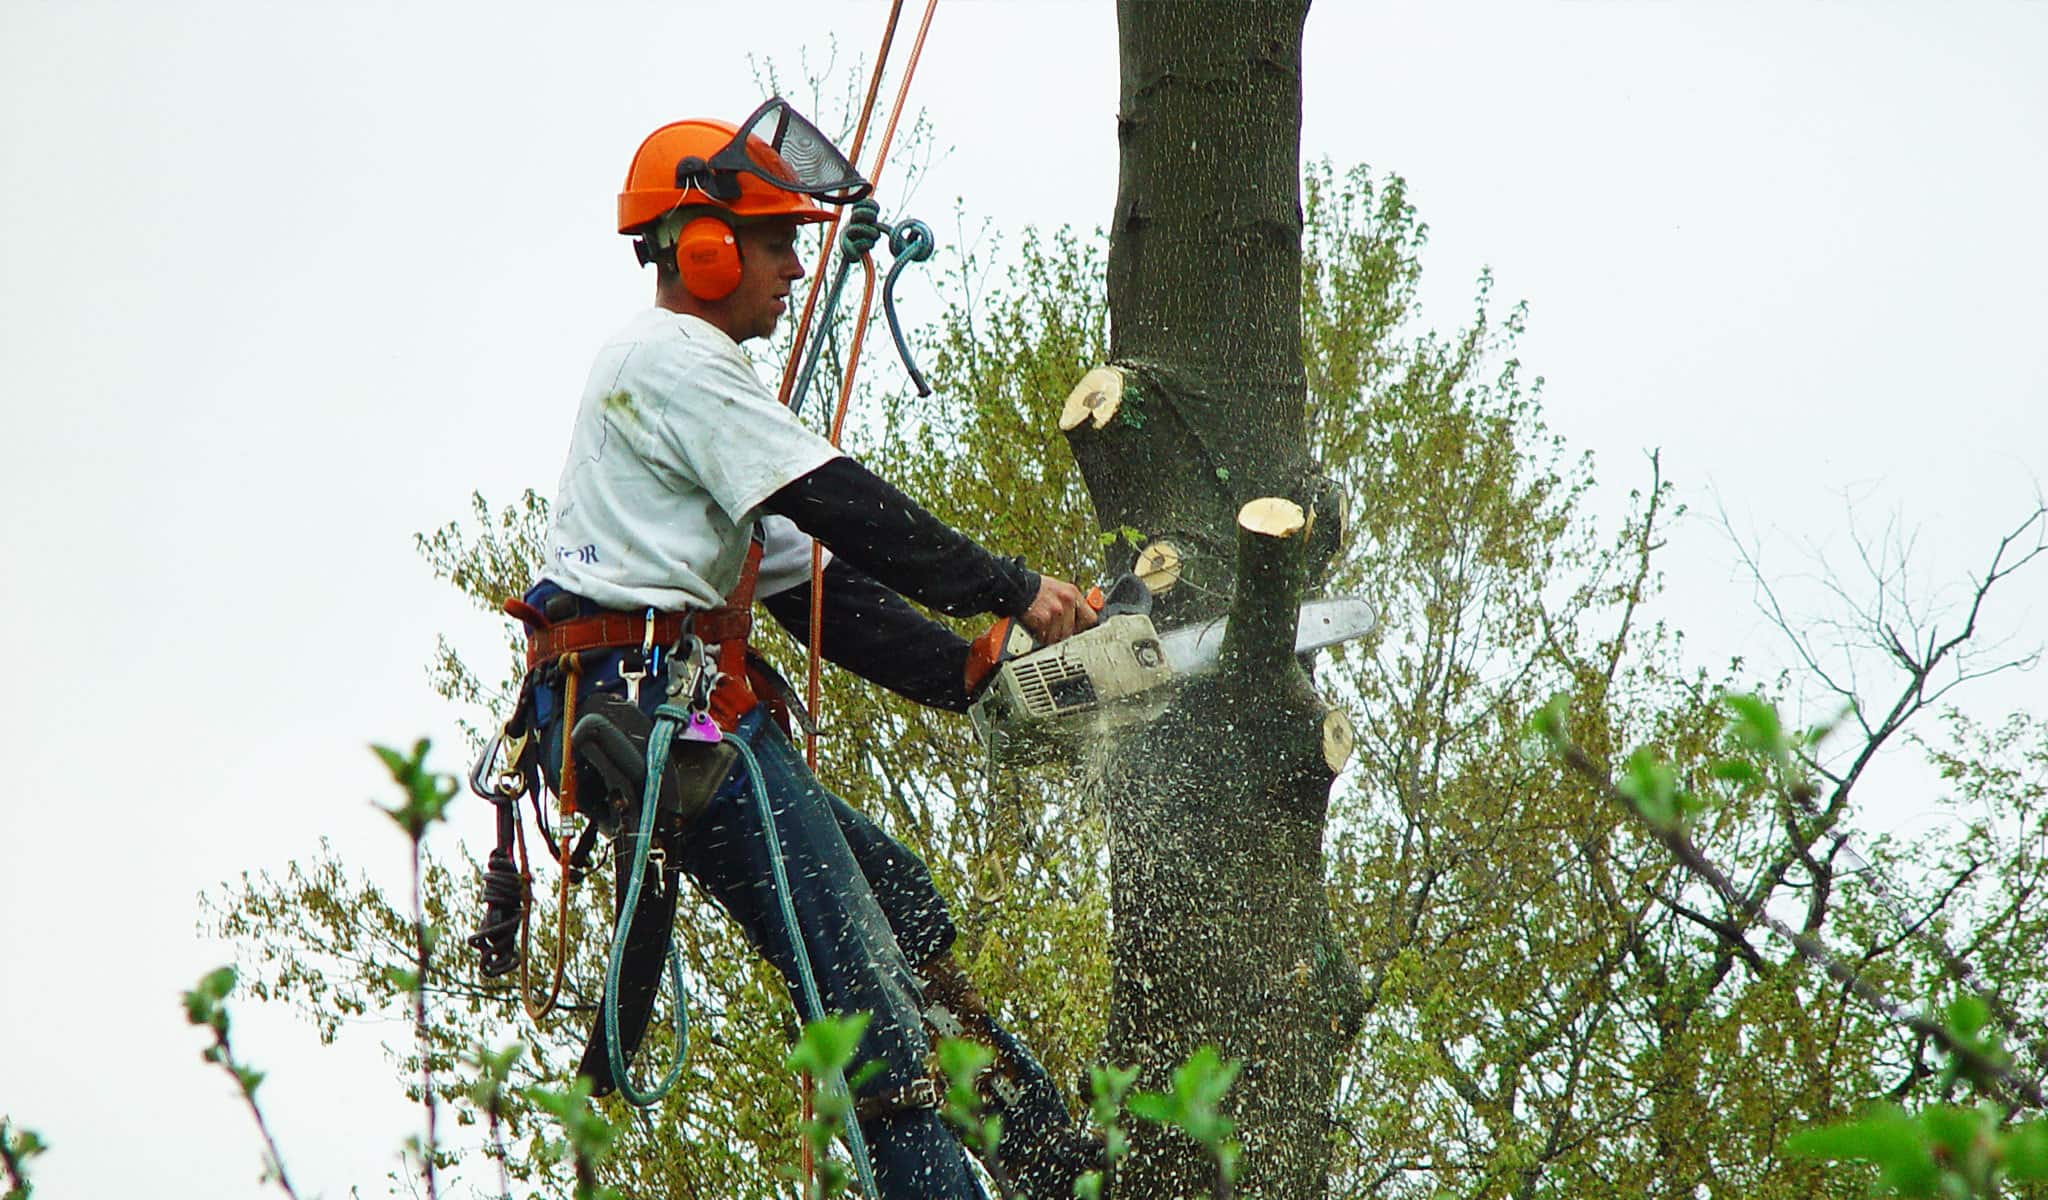 Arbor Services worker sawing tree